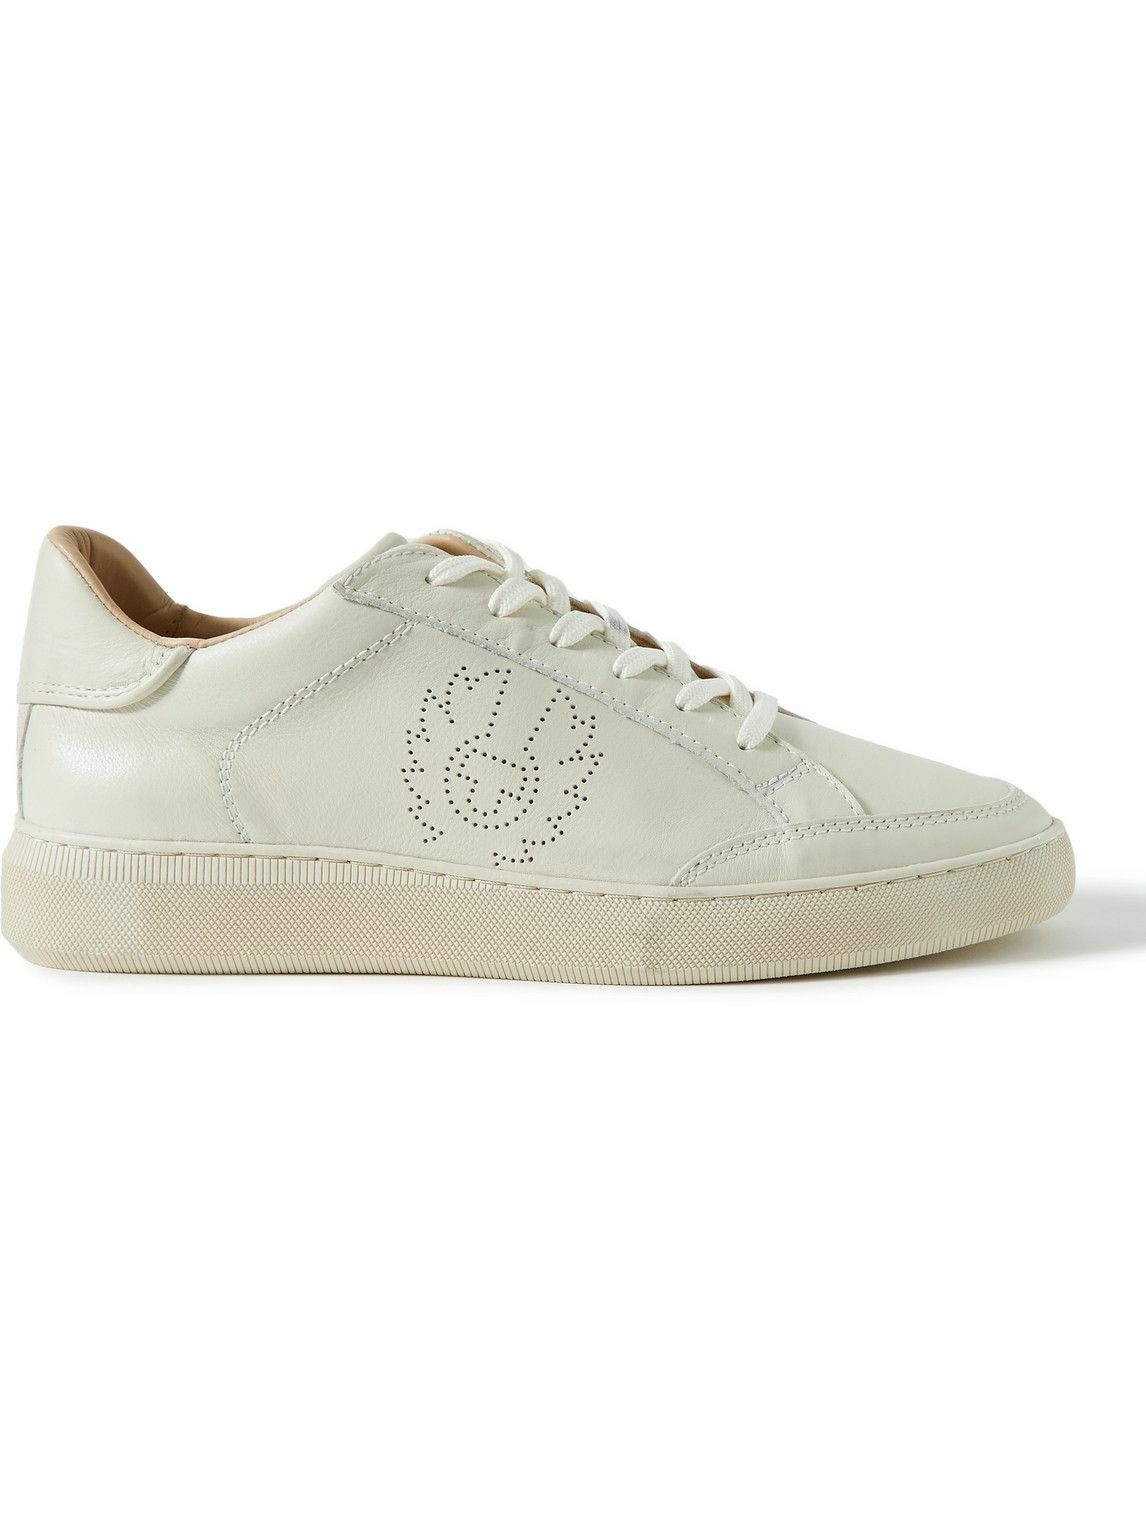 Photo: Belstaff - Track Logo-Perforated Leather Sneakers - Neutrals